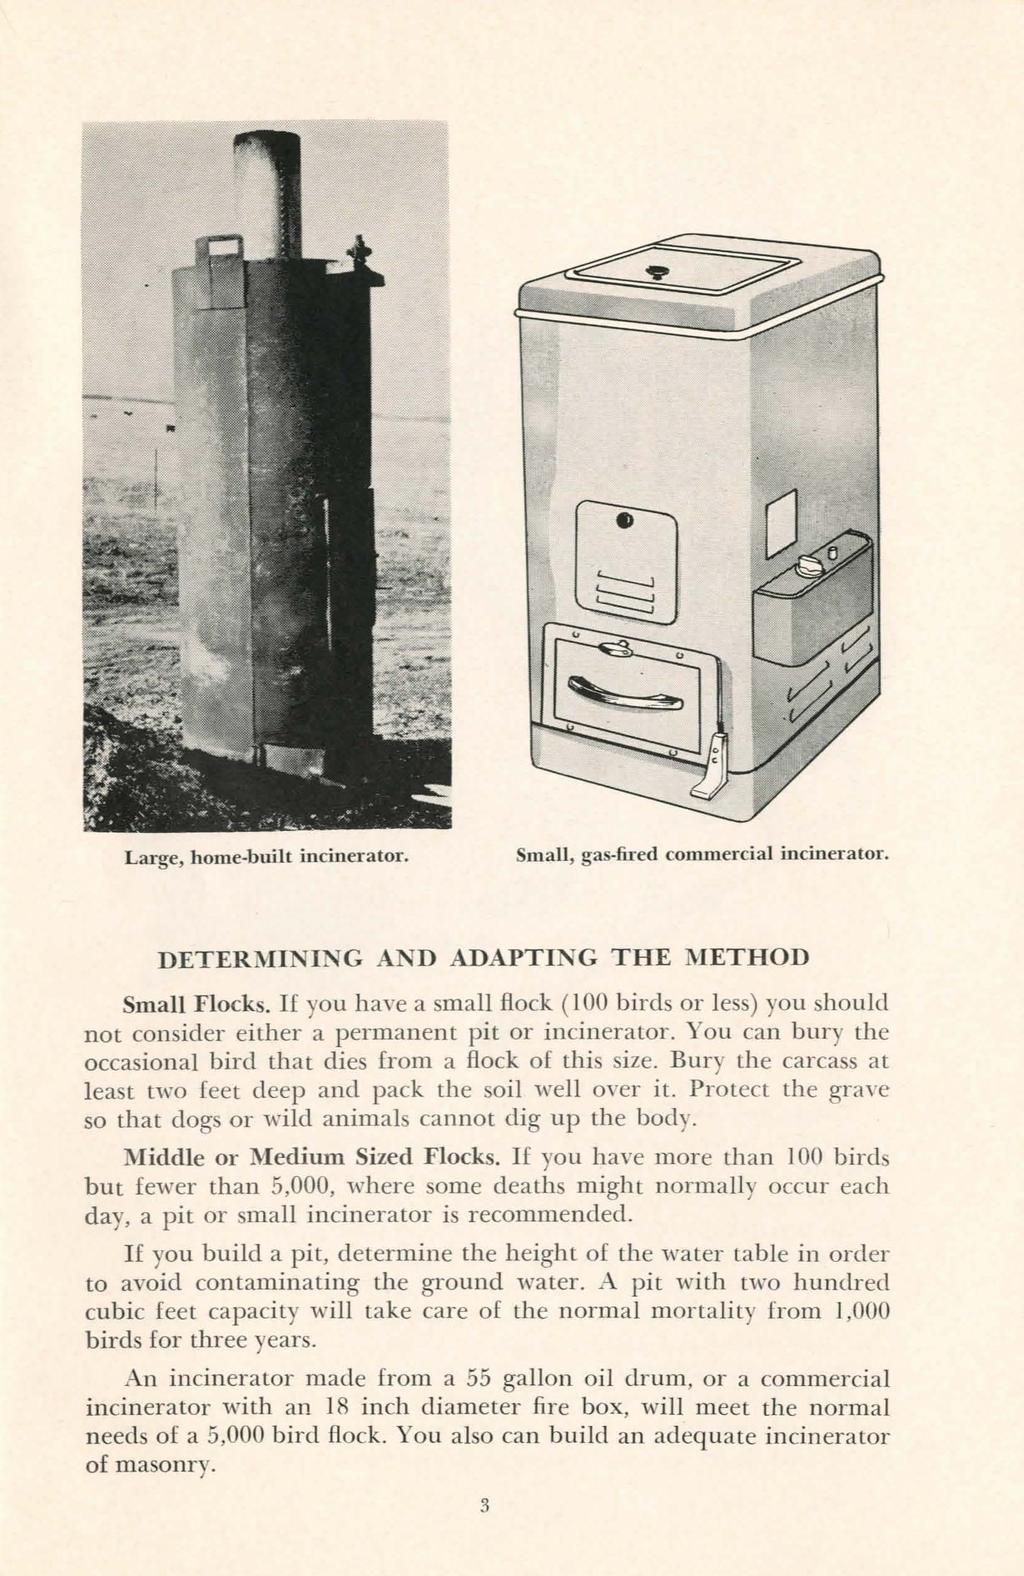 Large, home-built incinerator. Small, gas-fired commercial inciner ator. DETERMINING AND ADAPTIN G THE METHOD Small Flocks.